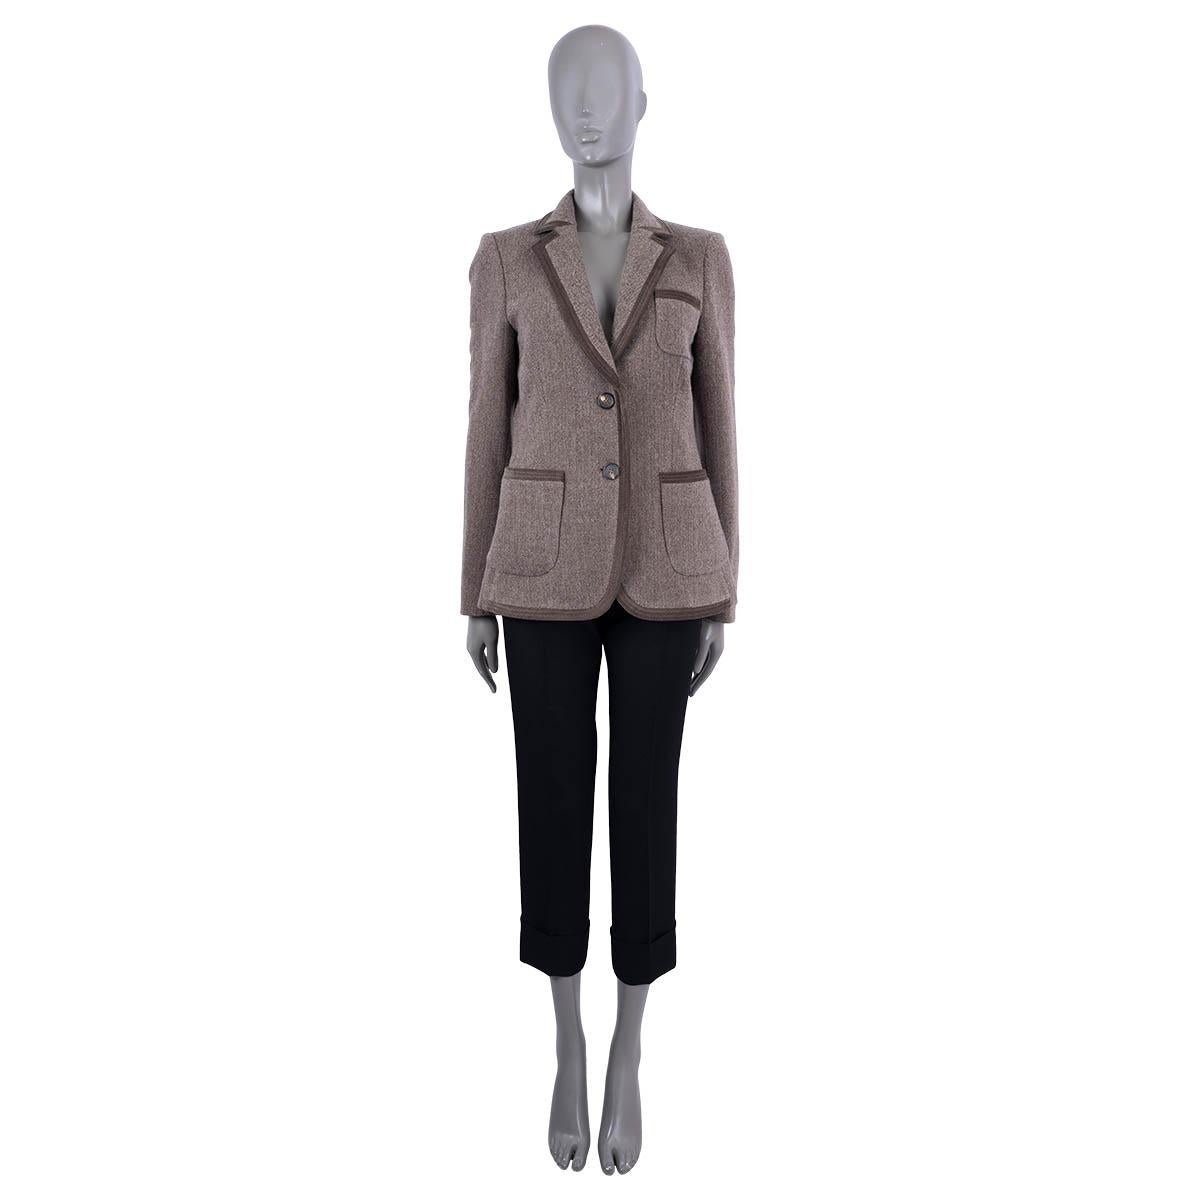 100% authentic Etro herringbone notch lapel blazer jacket in brown and taupe wool(75%), cashmere (15%) and polyamide (10%). Inside details and sleeve lining viscose (100%). The design features two patch pockets and one chest pocket and trim in brown